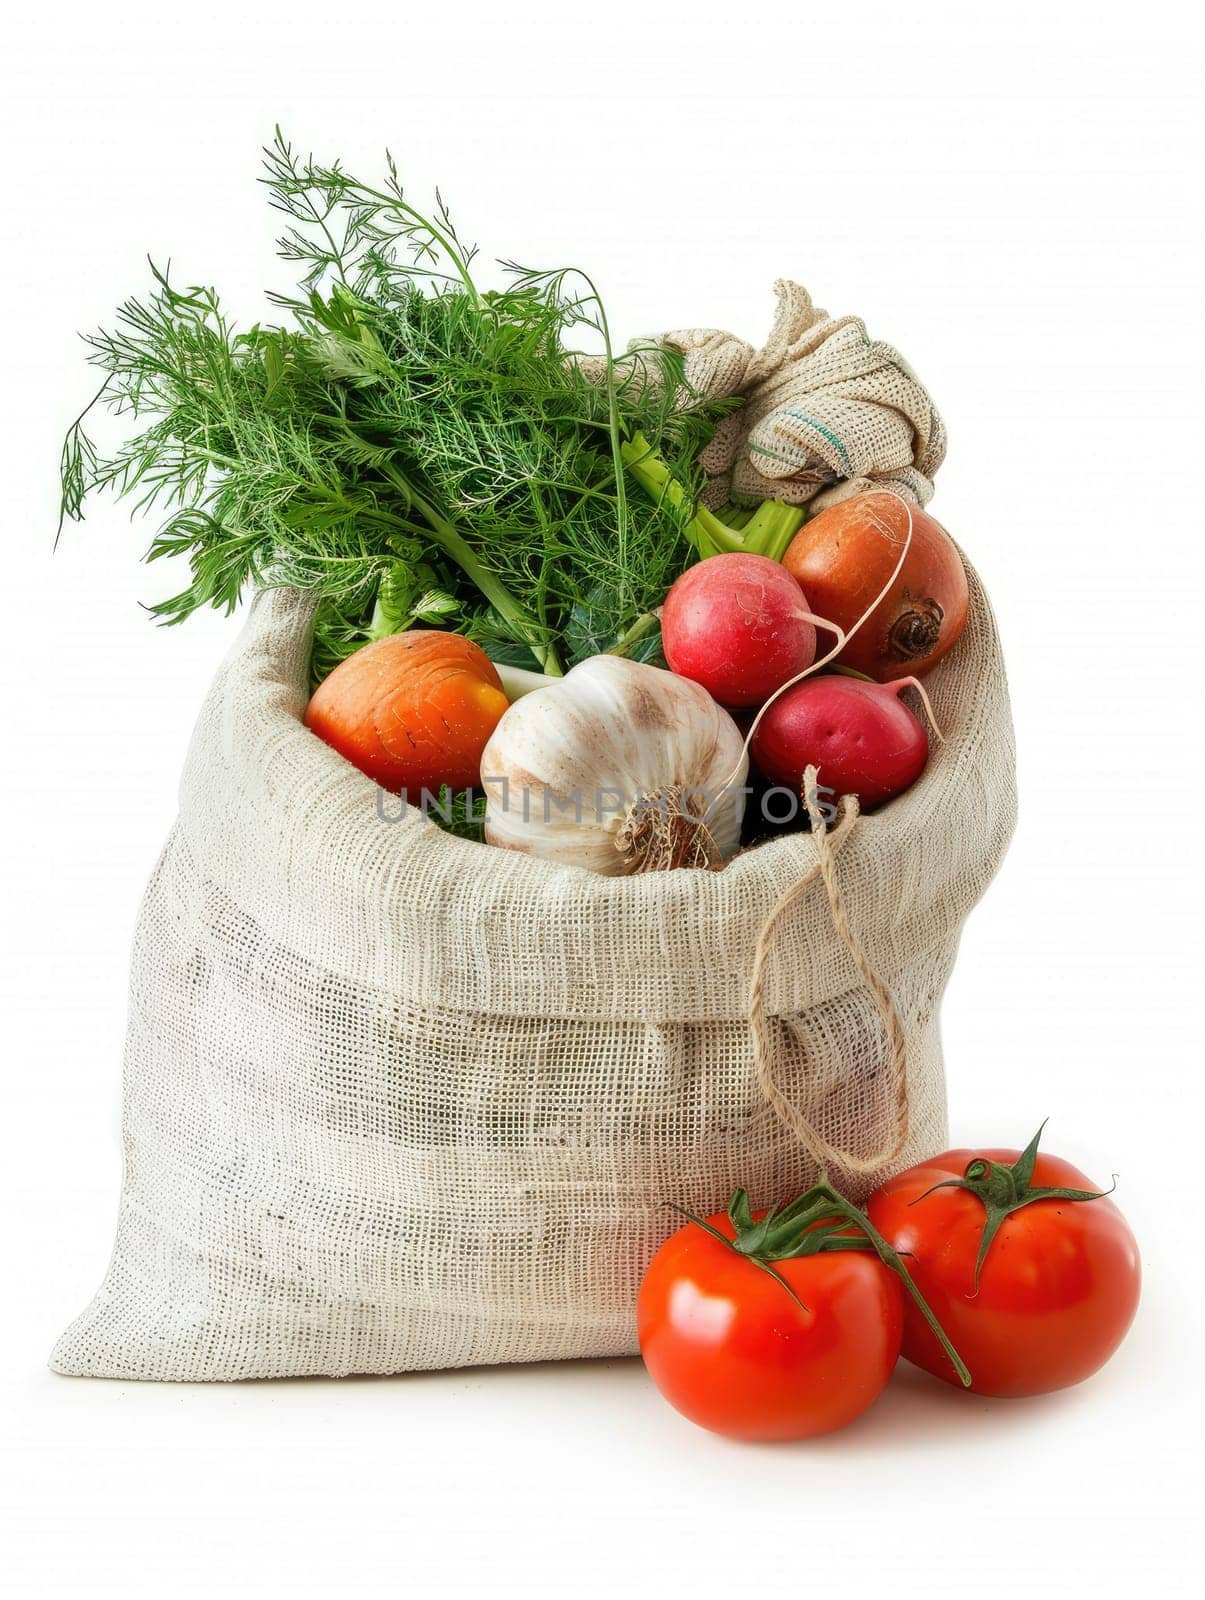 Burlap bag filled with fresh vegetables including tomatoes, garlic, radishes, carrots, and greens on white background. Healthy eating and eco friendly shopping concept. Ai generation. High quality